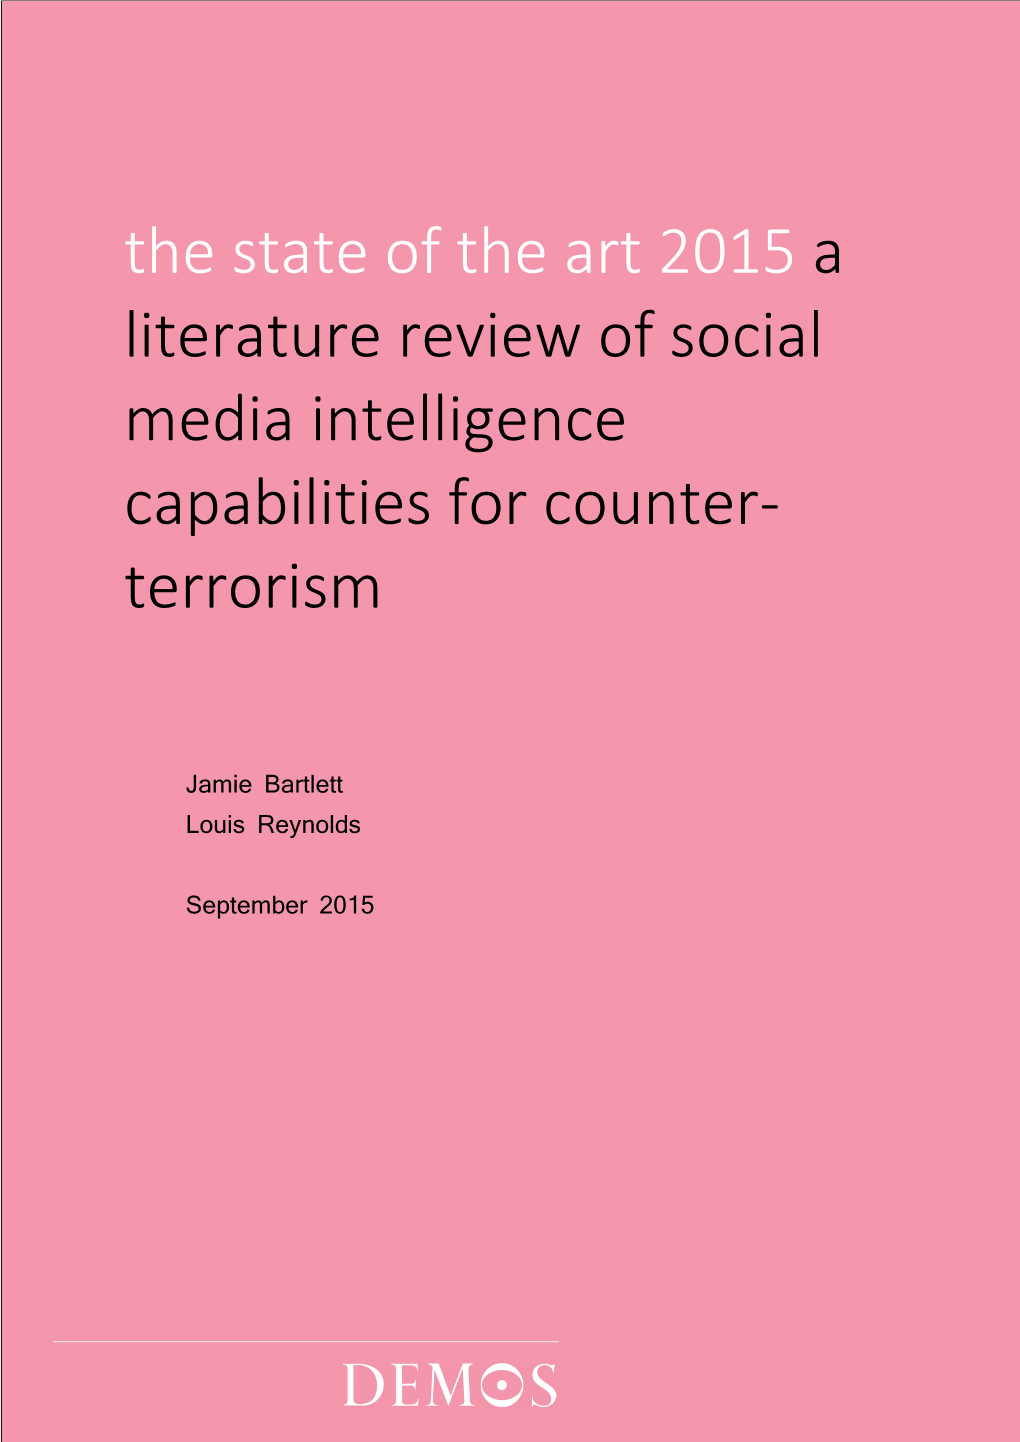 Literature Review of Social Media Intelligence Capabilities for Counter- Terrorism